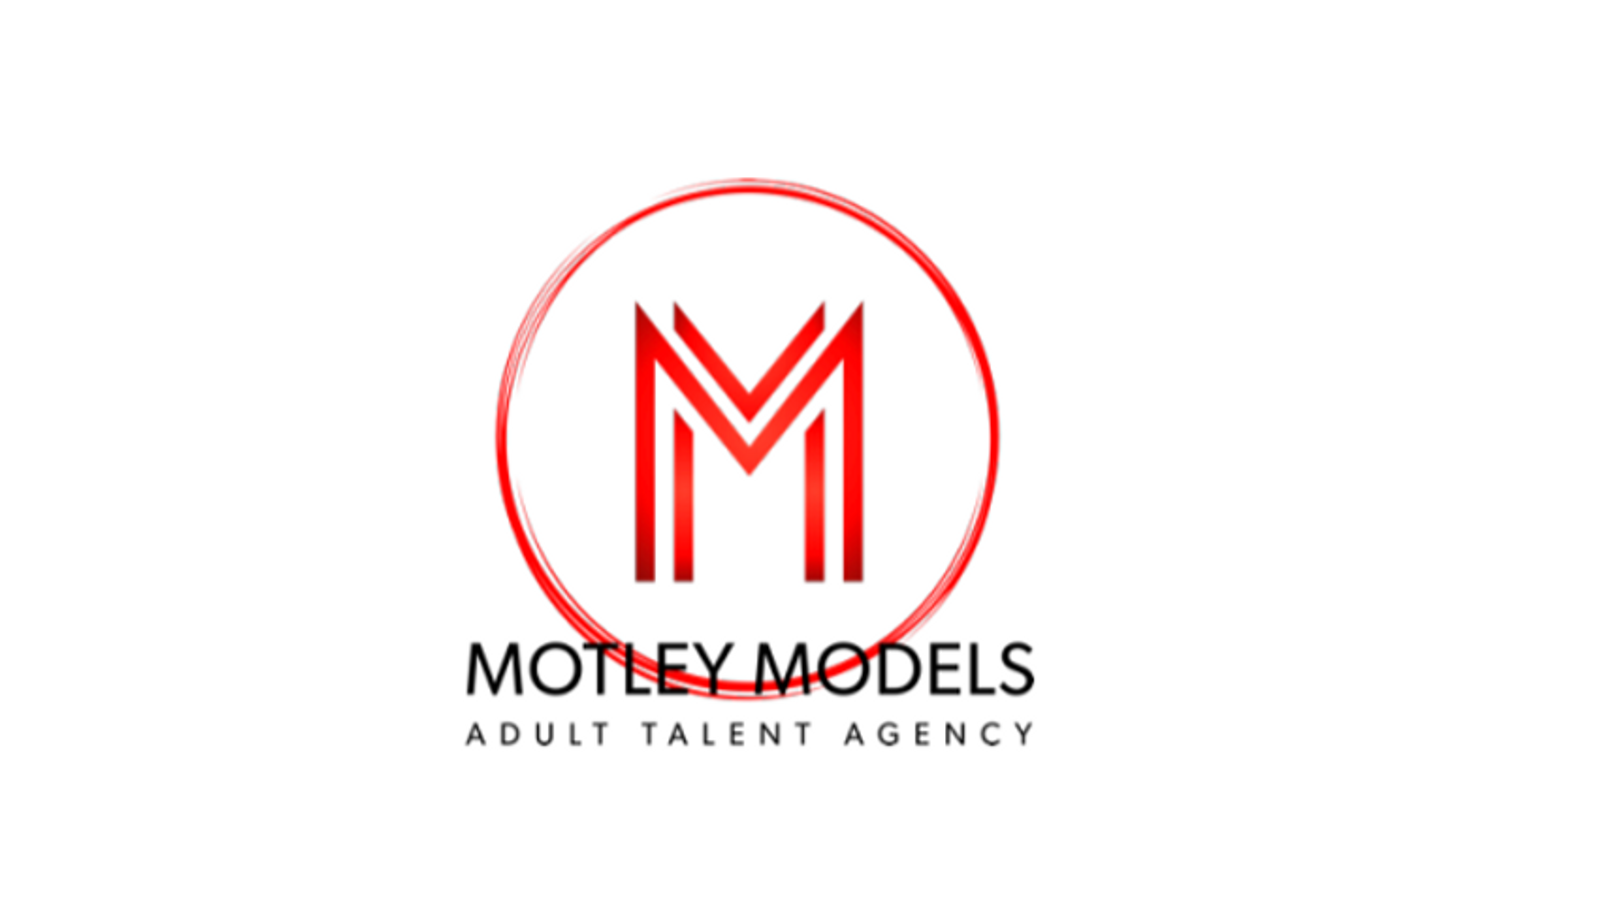 Motley Models CEO Dave Rock Issues Statement